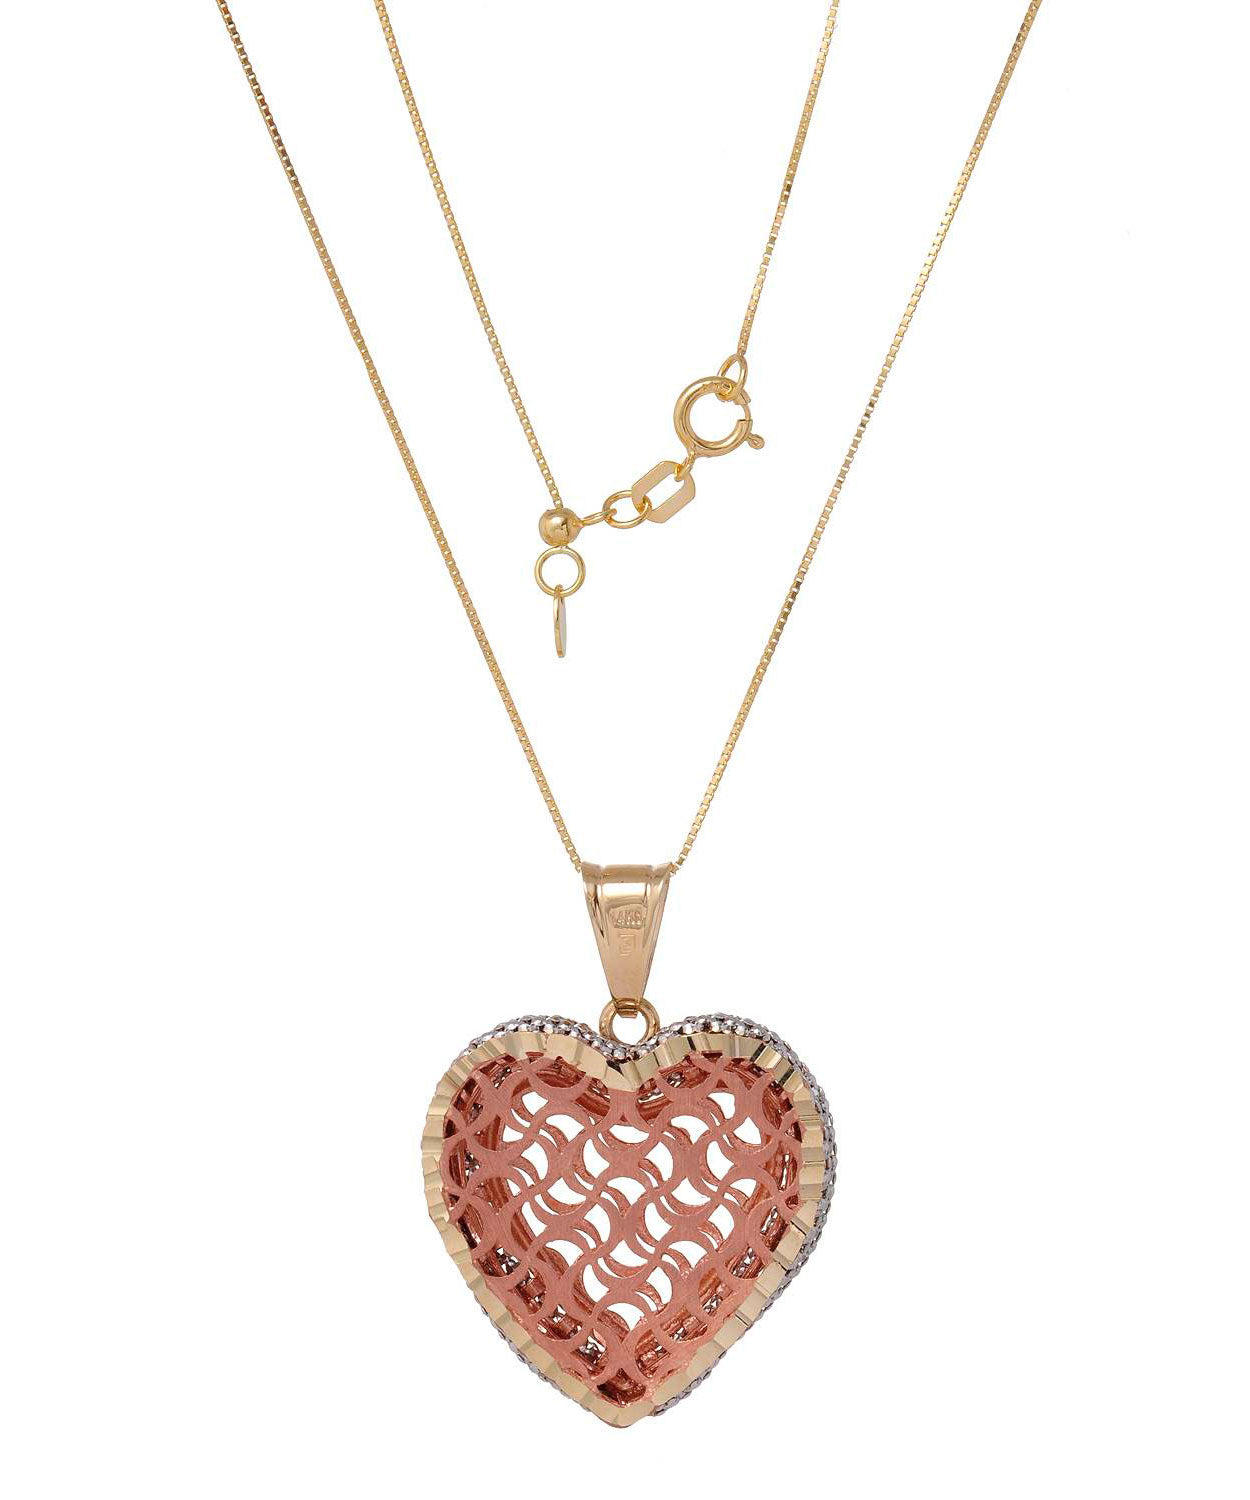 14k Tri-Tone Gold Heart Pendant With Box Chain - Made in Italy View 2